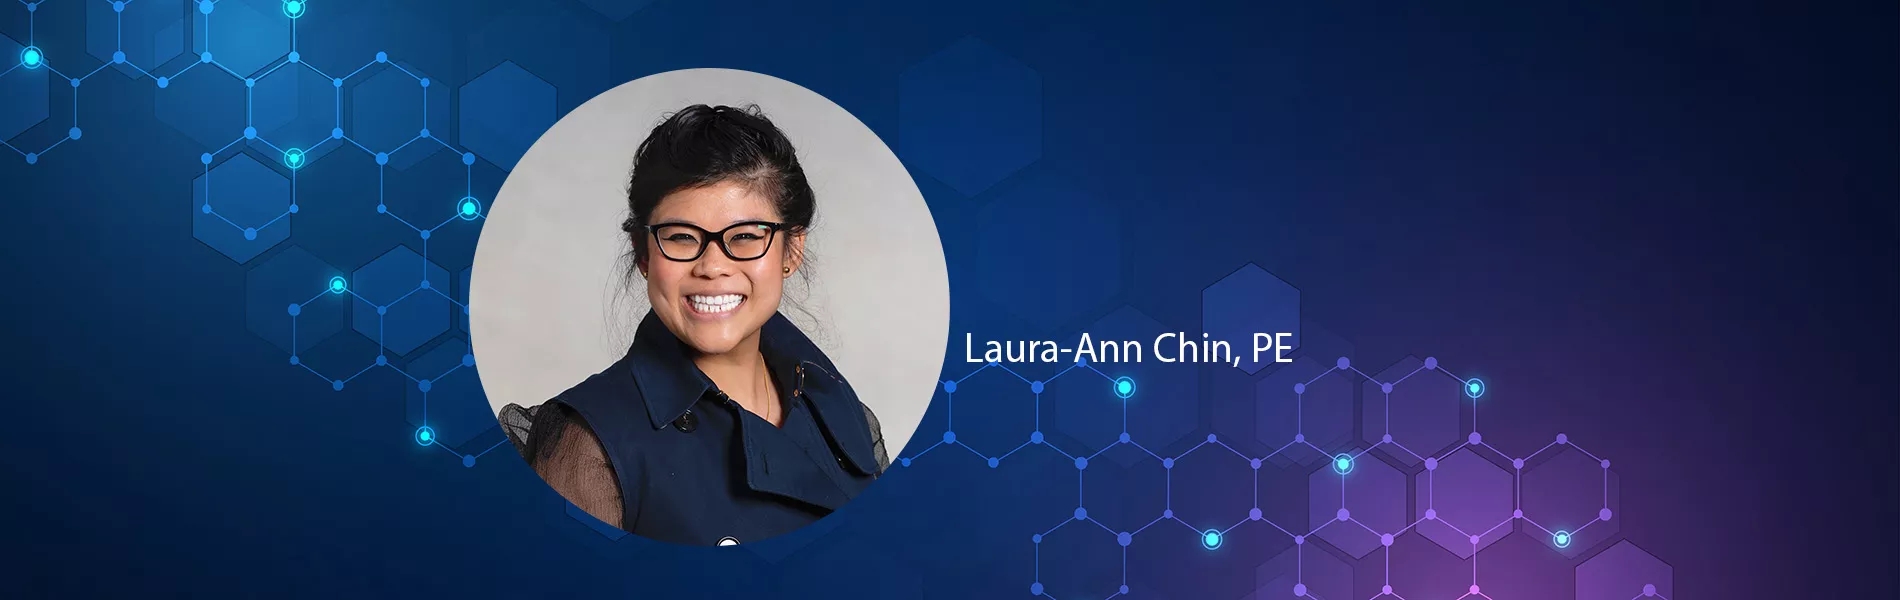 CoP Leader Profiles: Laura-Ann Chin, PE (Biotechnology Community of Practice Co-chair)